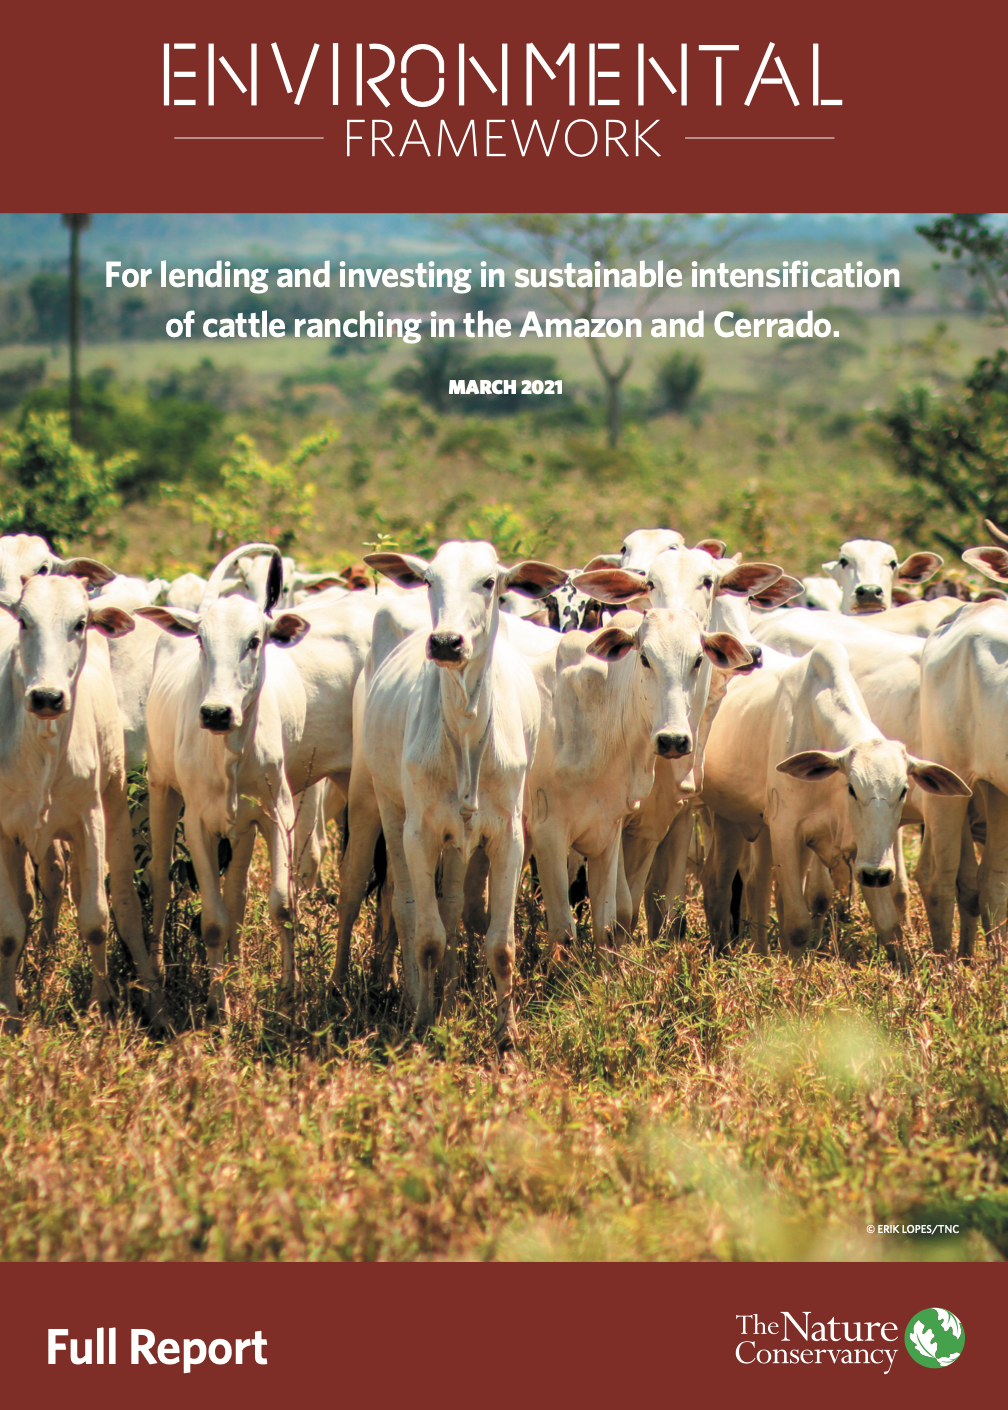 Full report of Environmental Framework for investing in sustainable intensification of cattle ranching in the Amazon and Cerrado.